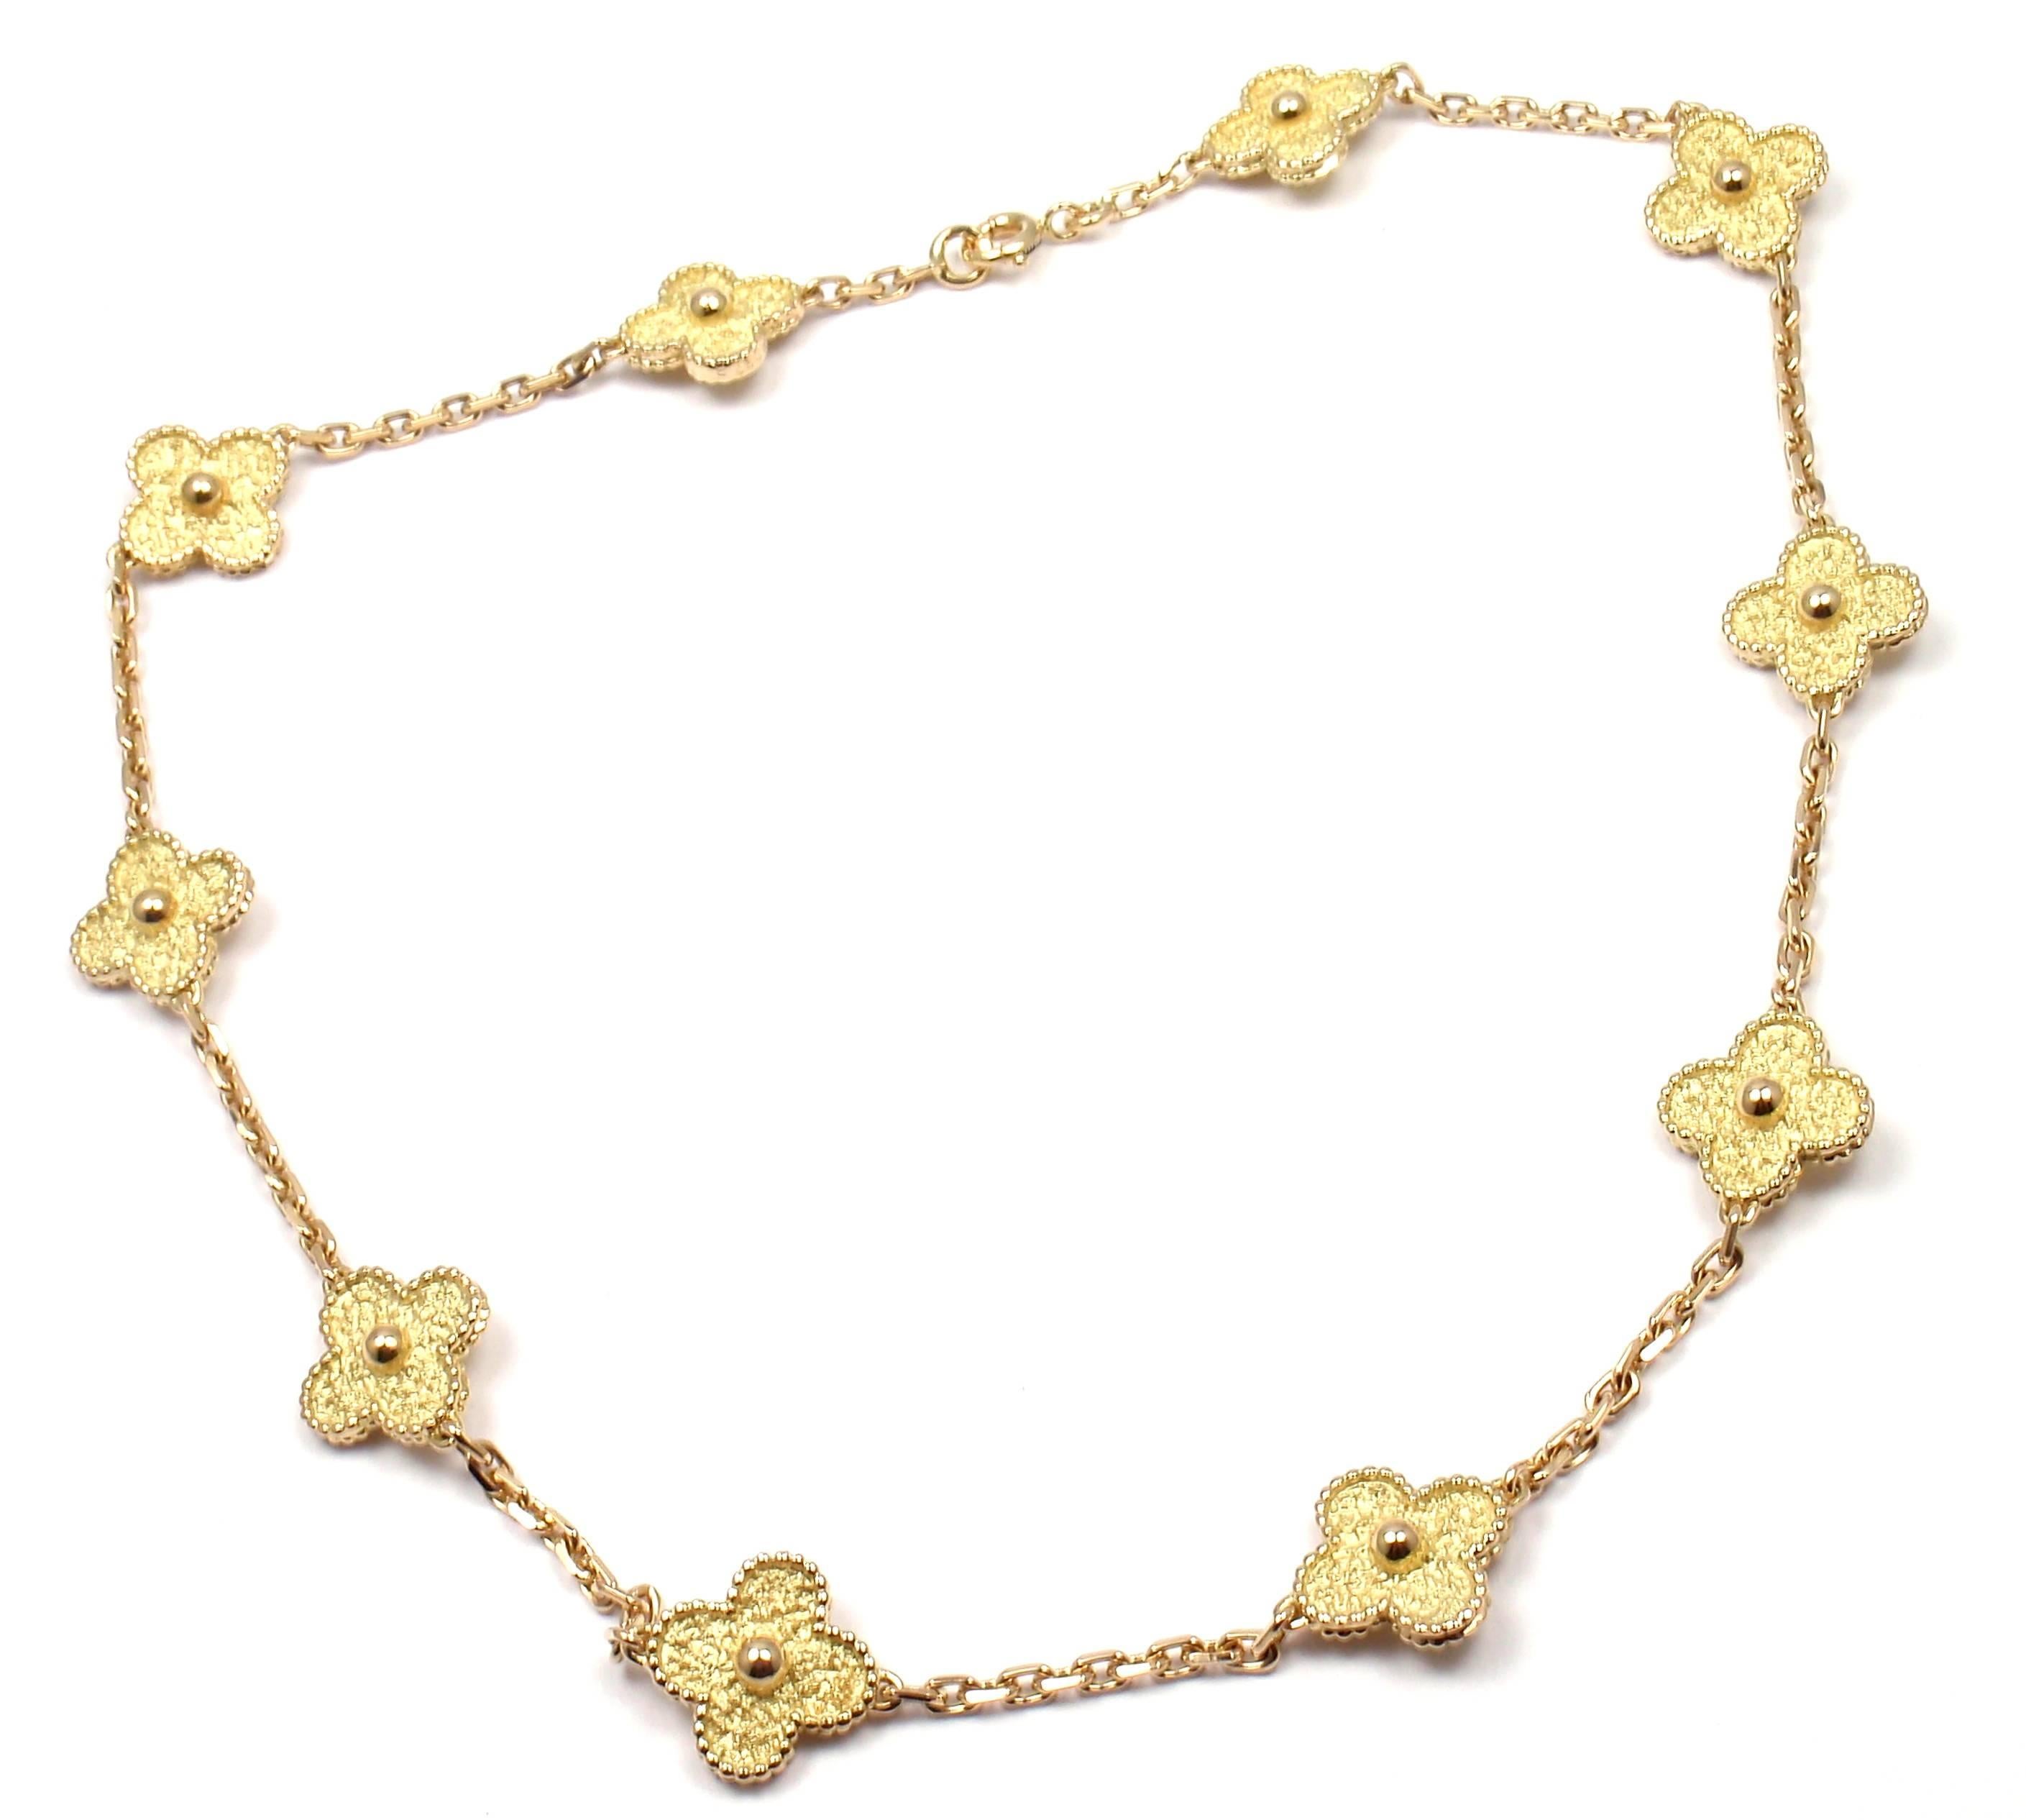 18k Yellow Gold Vintage Alhambra 10 Motif Necklace by Van Cleef & Arpels.
With 10 gold alhambra motifs 14mm each

Details:
Length: 16